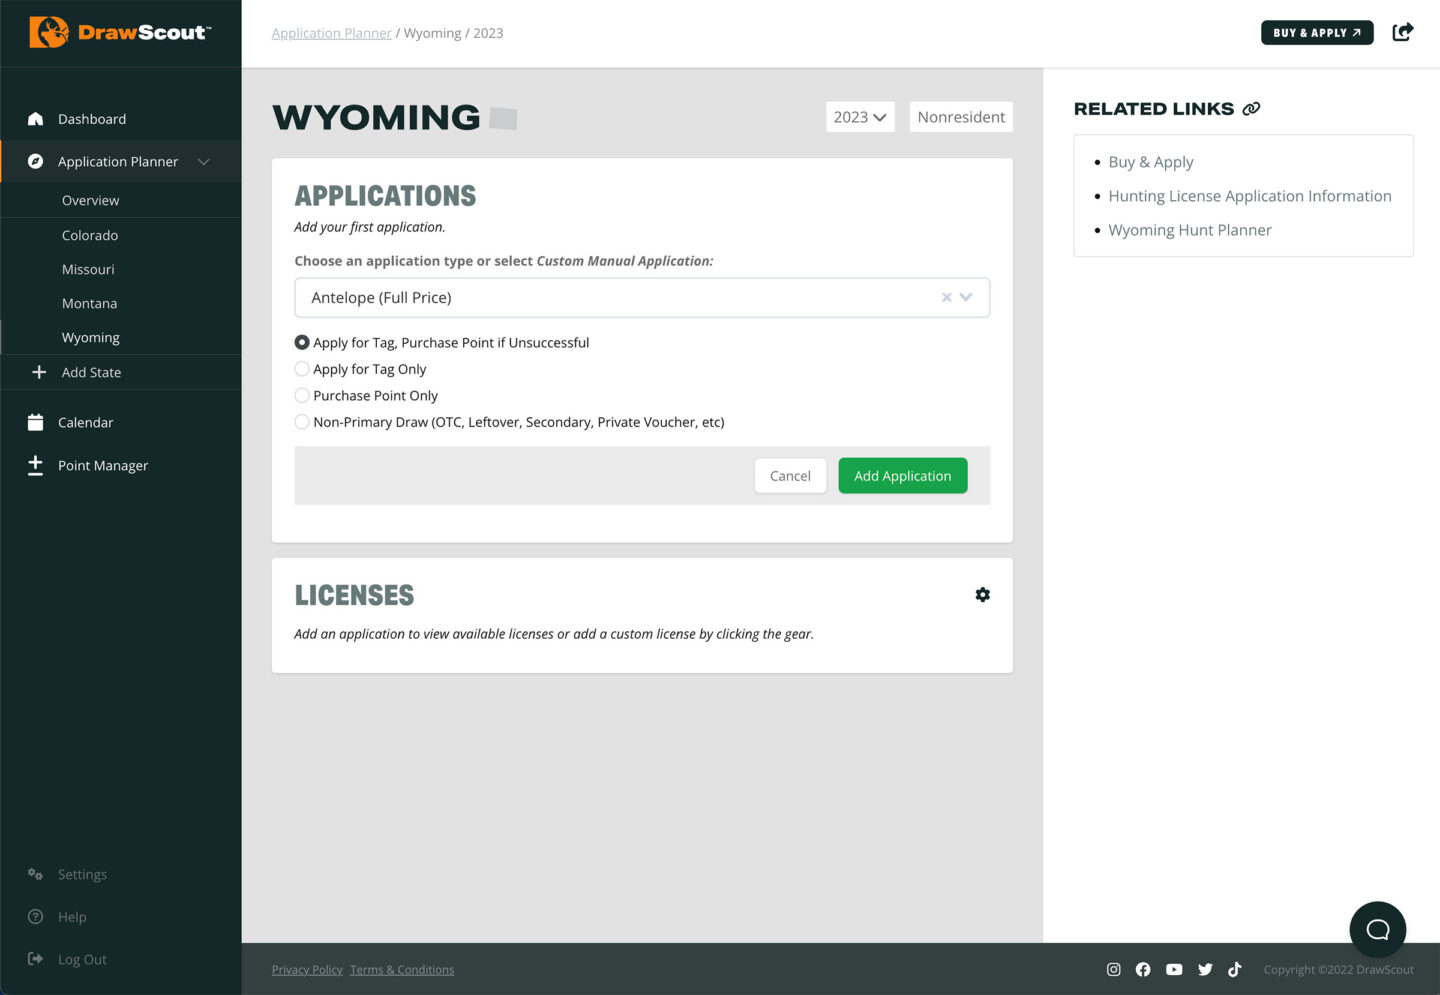 Wyoming - Apply for Tag, Purchase Point if Unsuccessful